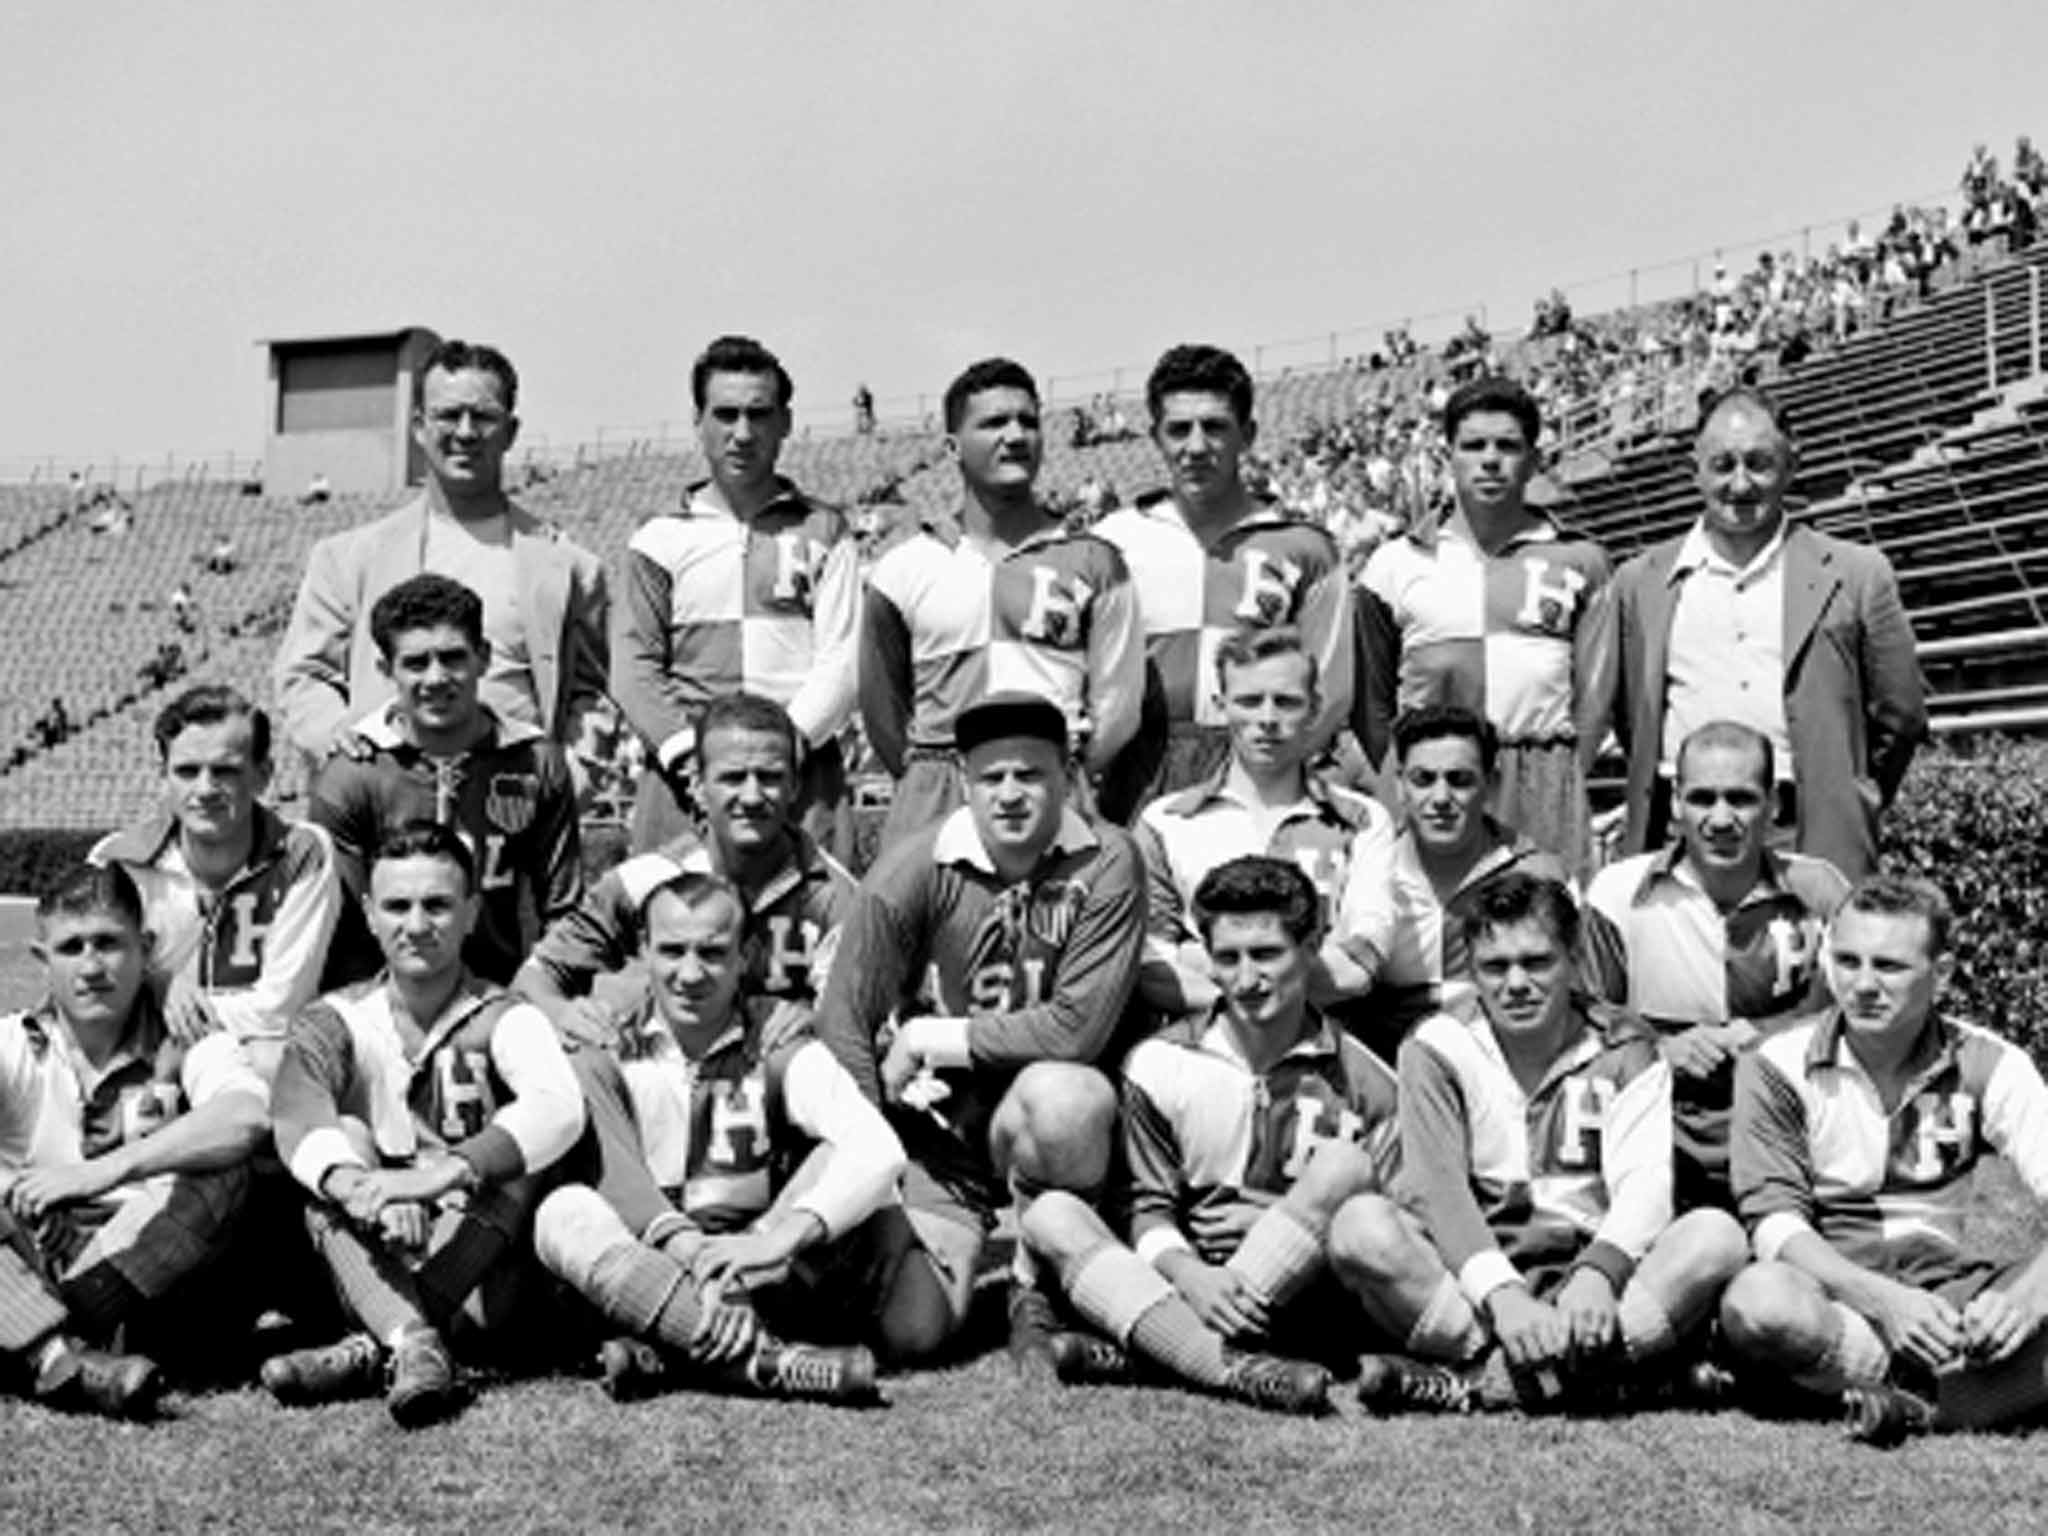 Borghi (middle row, second left) with the US team in 1950